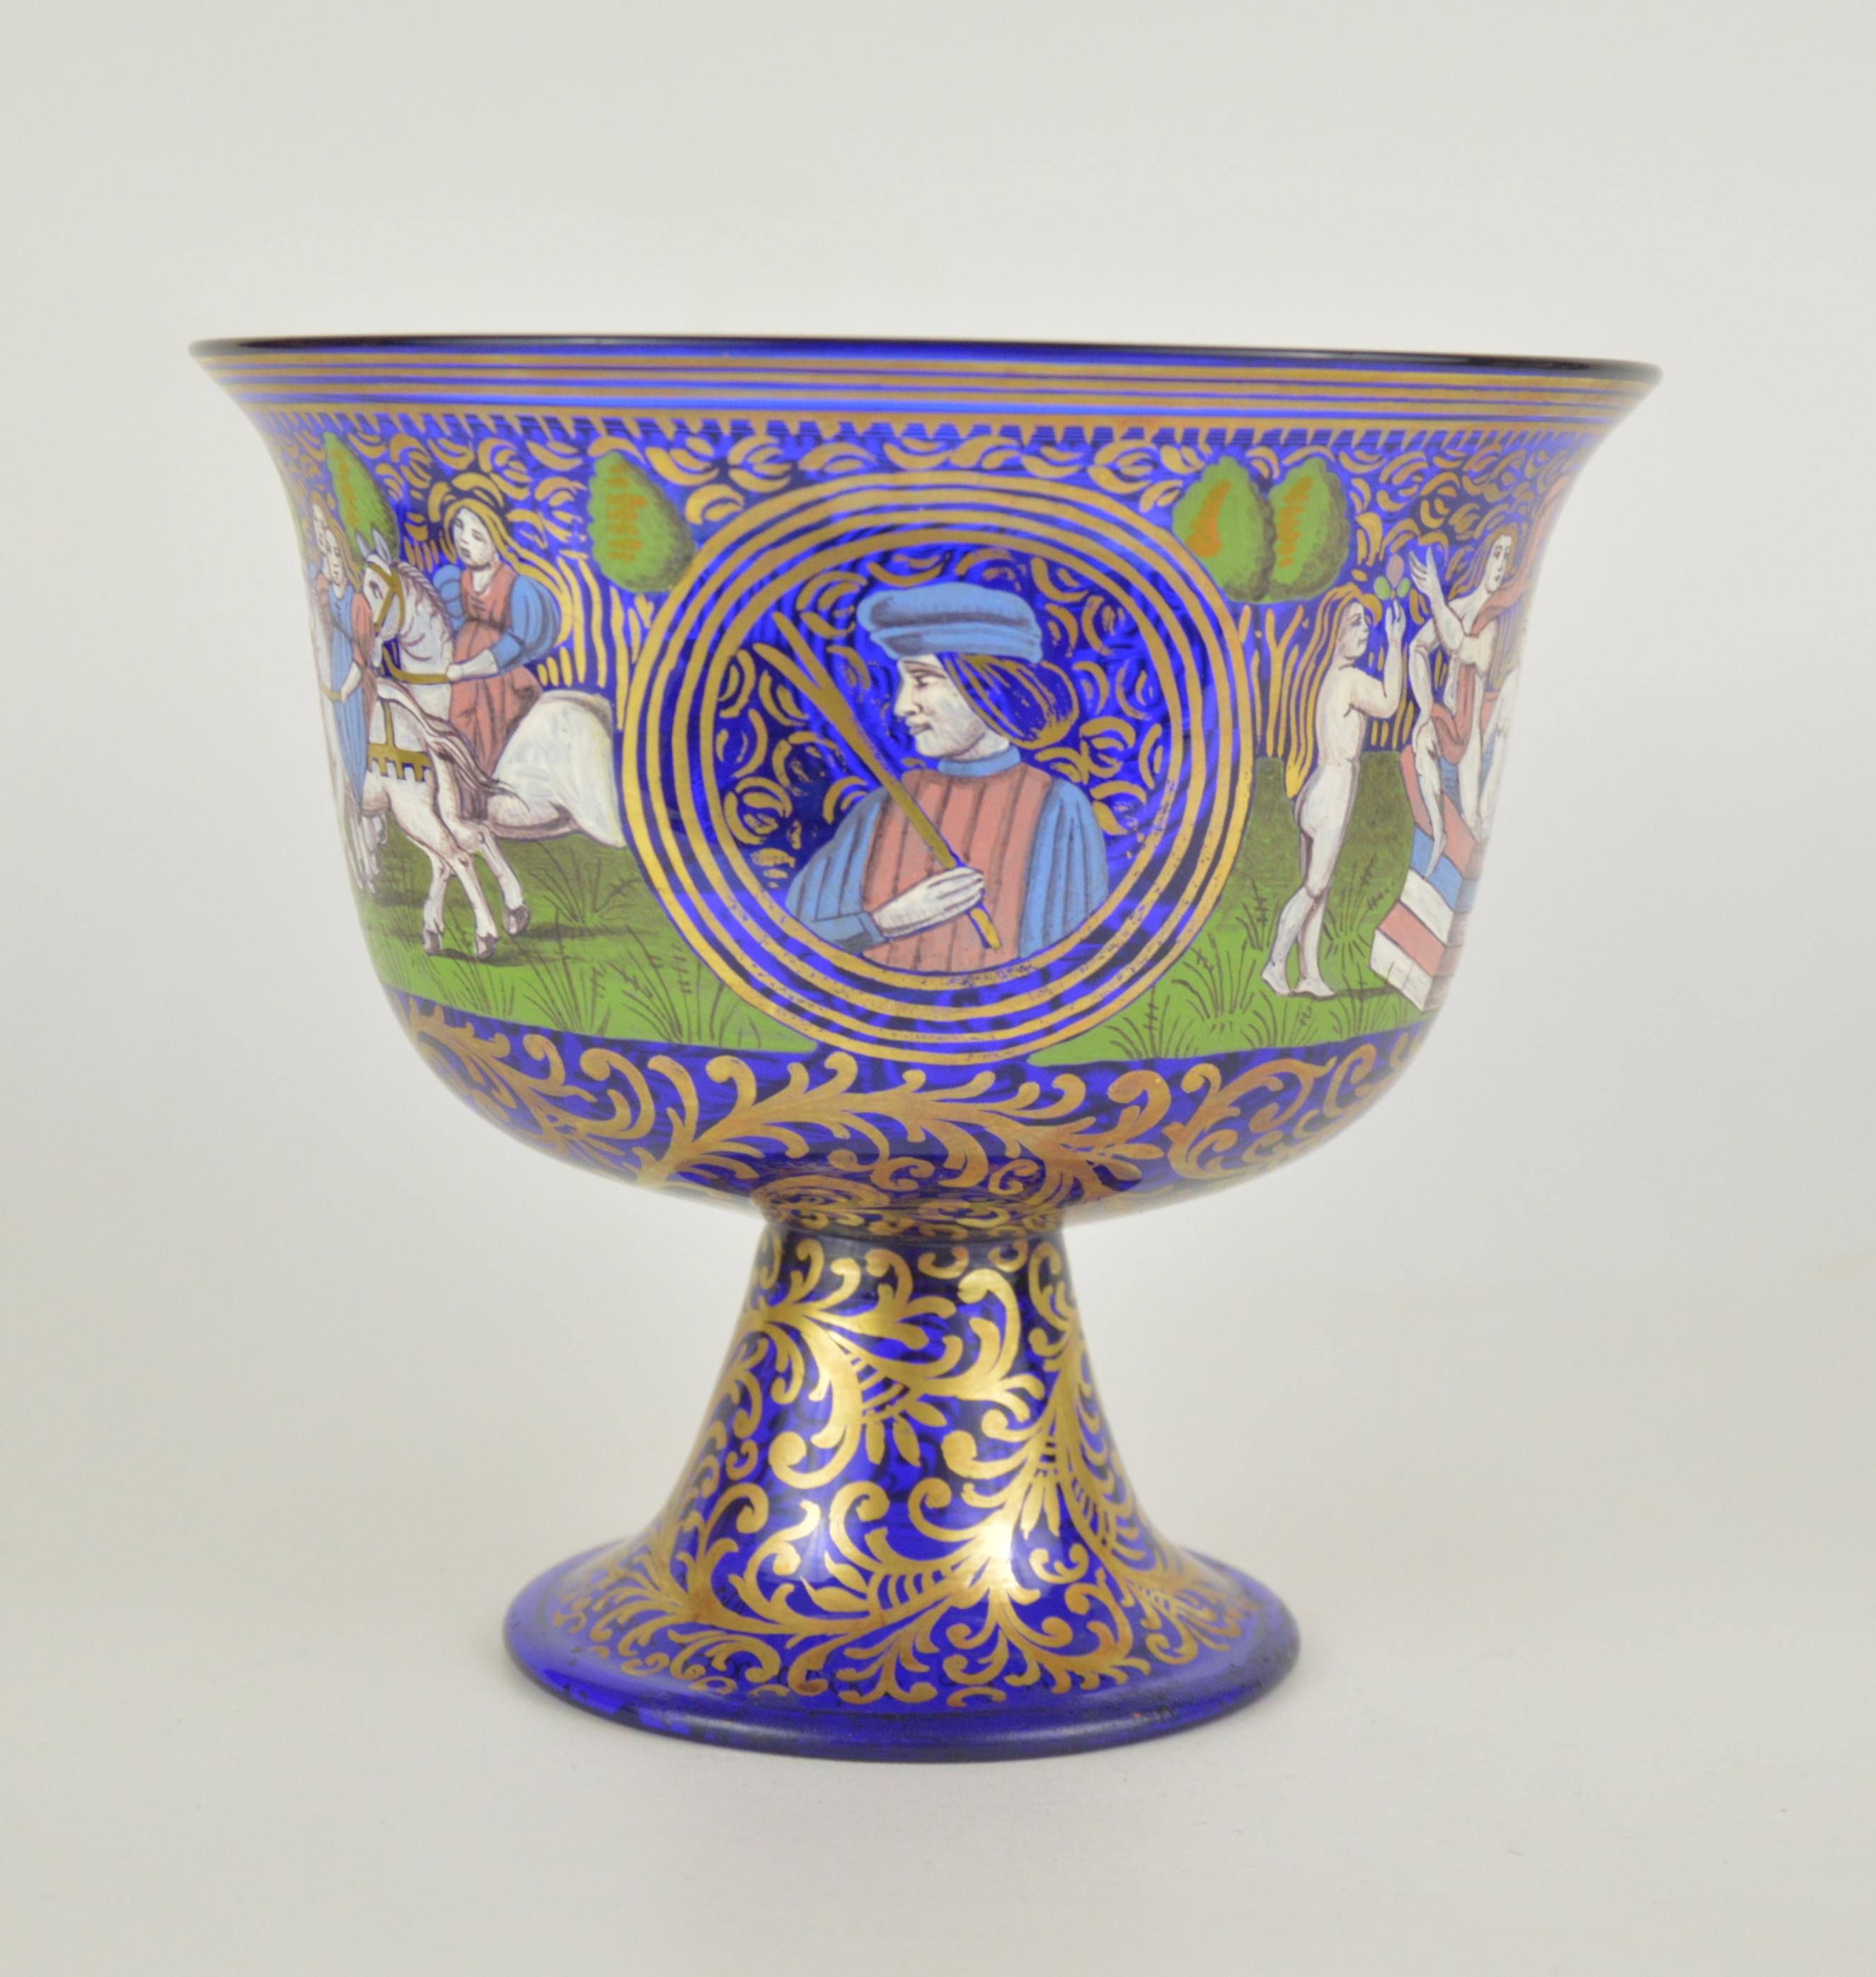 Art Glass Wedding Murano Cobalt Glass Cup with Enamelled Decoration Albertini Spezzamonte For Sale